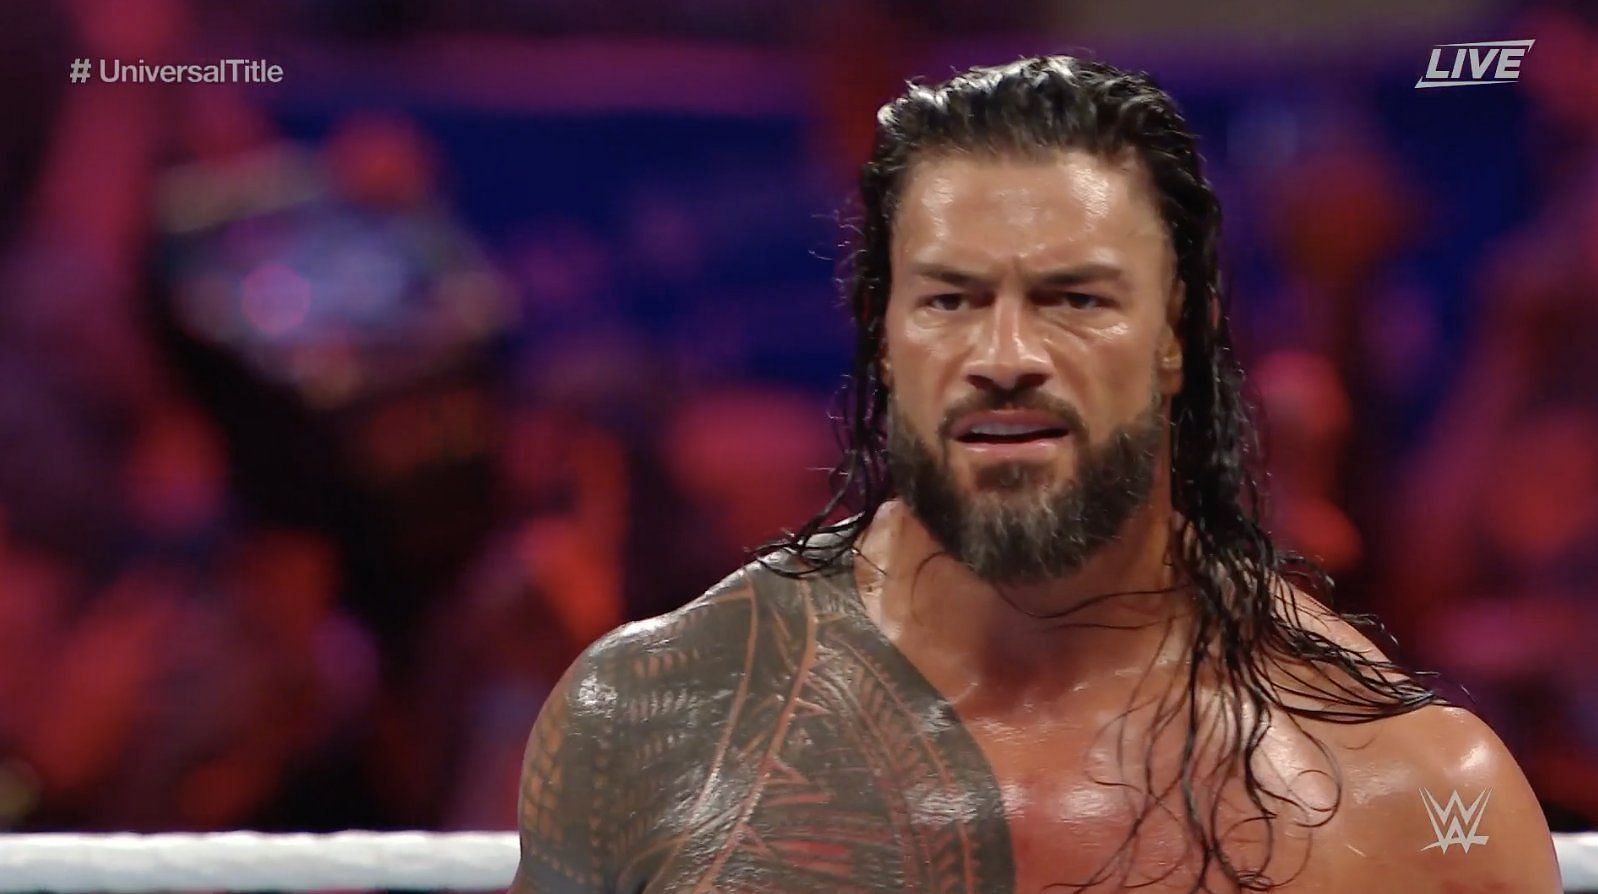 Roman Reigns returns to SmackDown this week